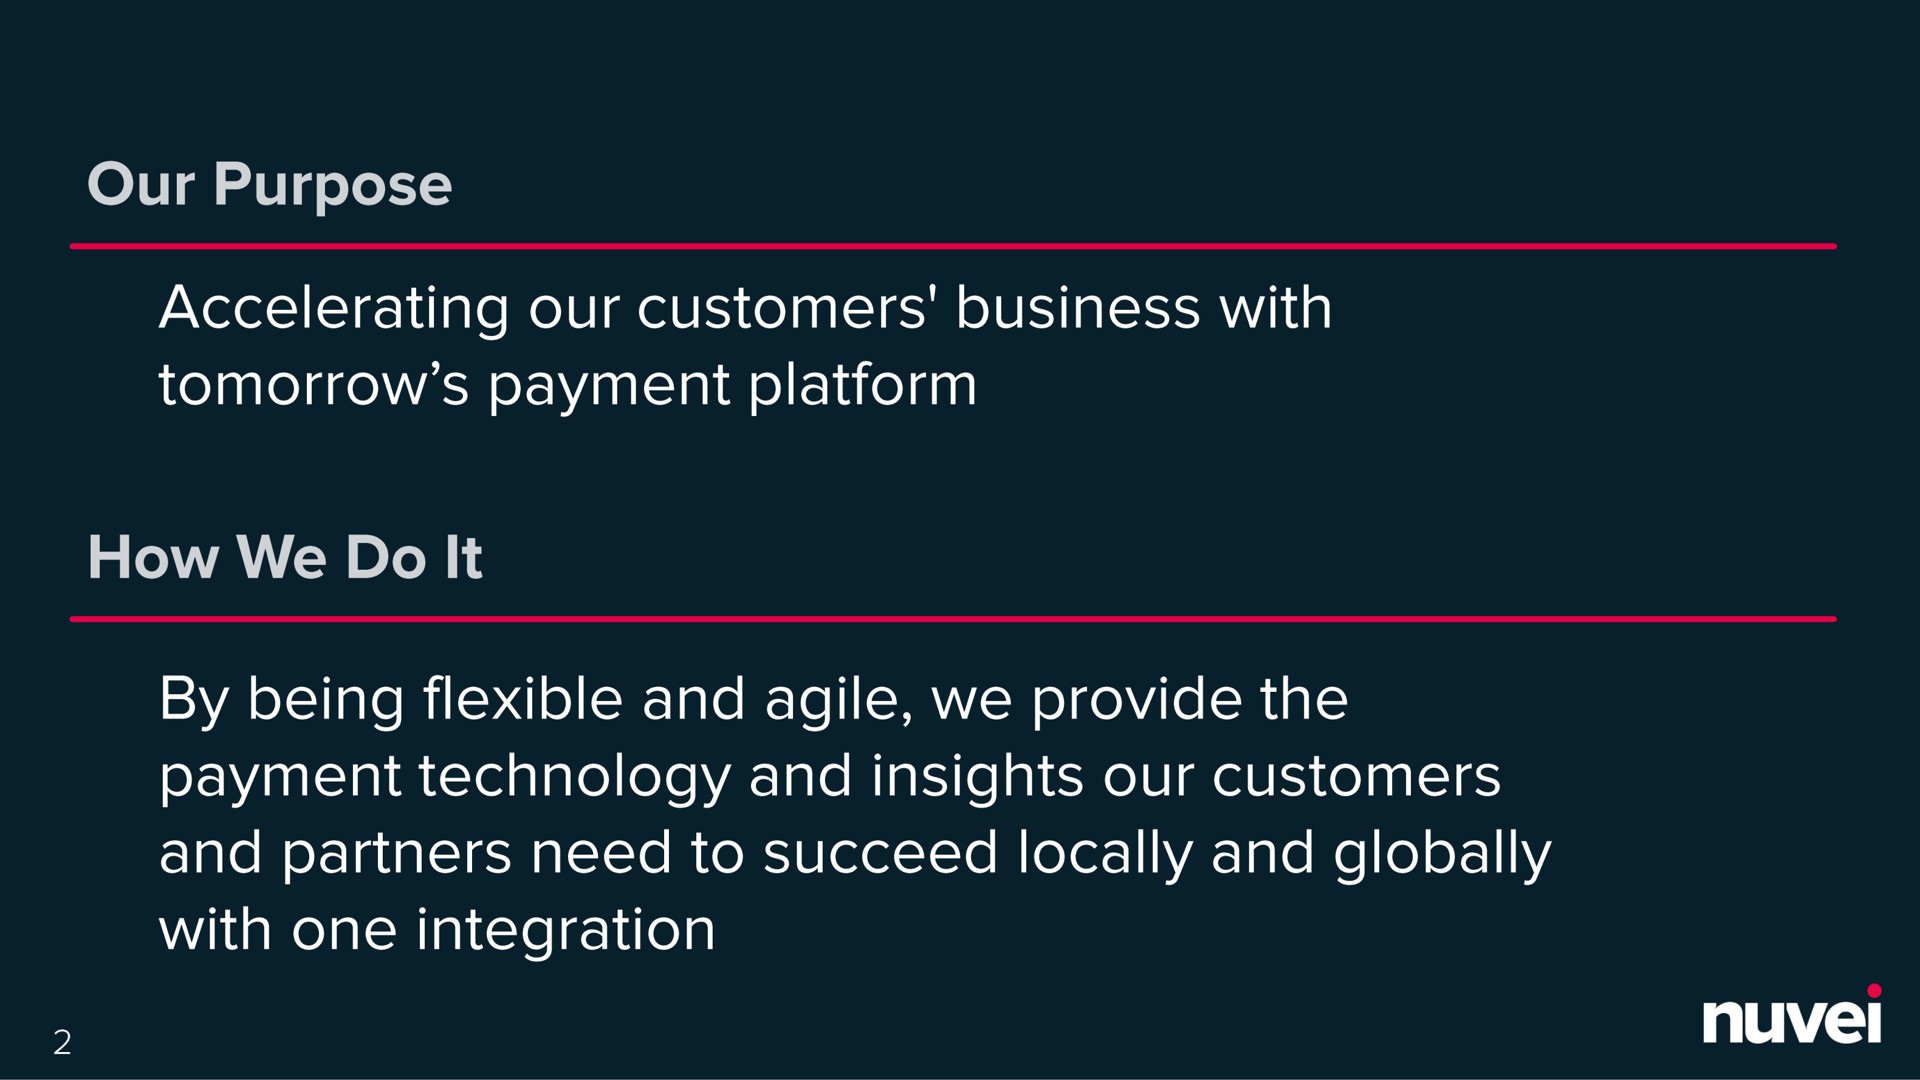 our purpose accelerating our customers business with tomorrow payment platform how we do it by being flexible and agile we provide the payment technology and insights our customers and partners need to succeed locally and globally with one integration a | Nuvei